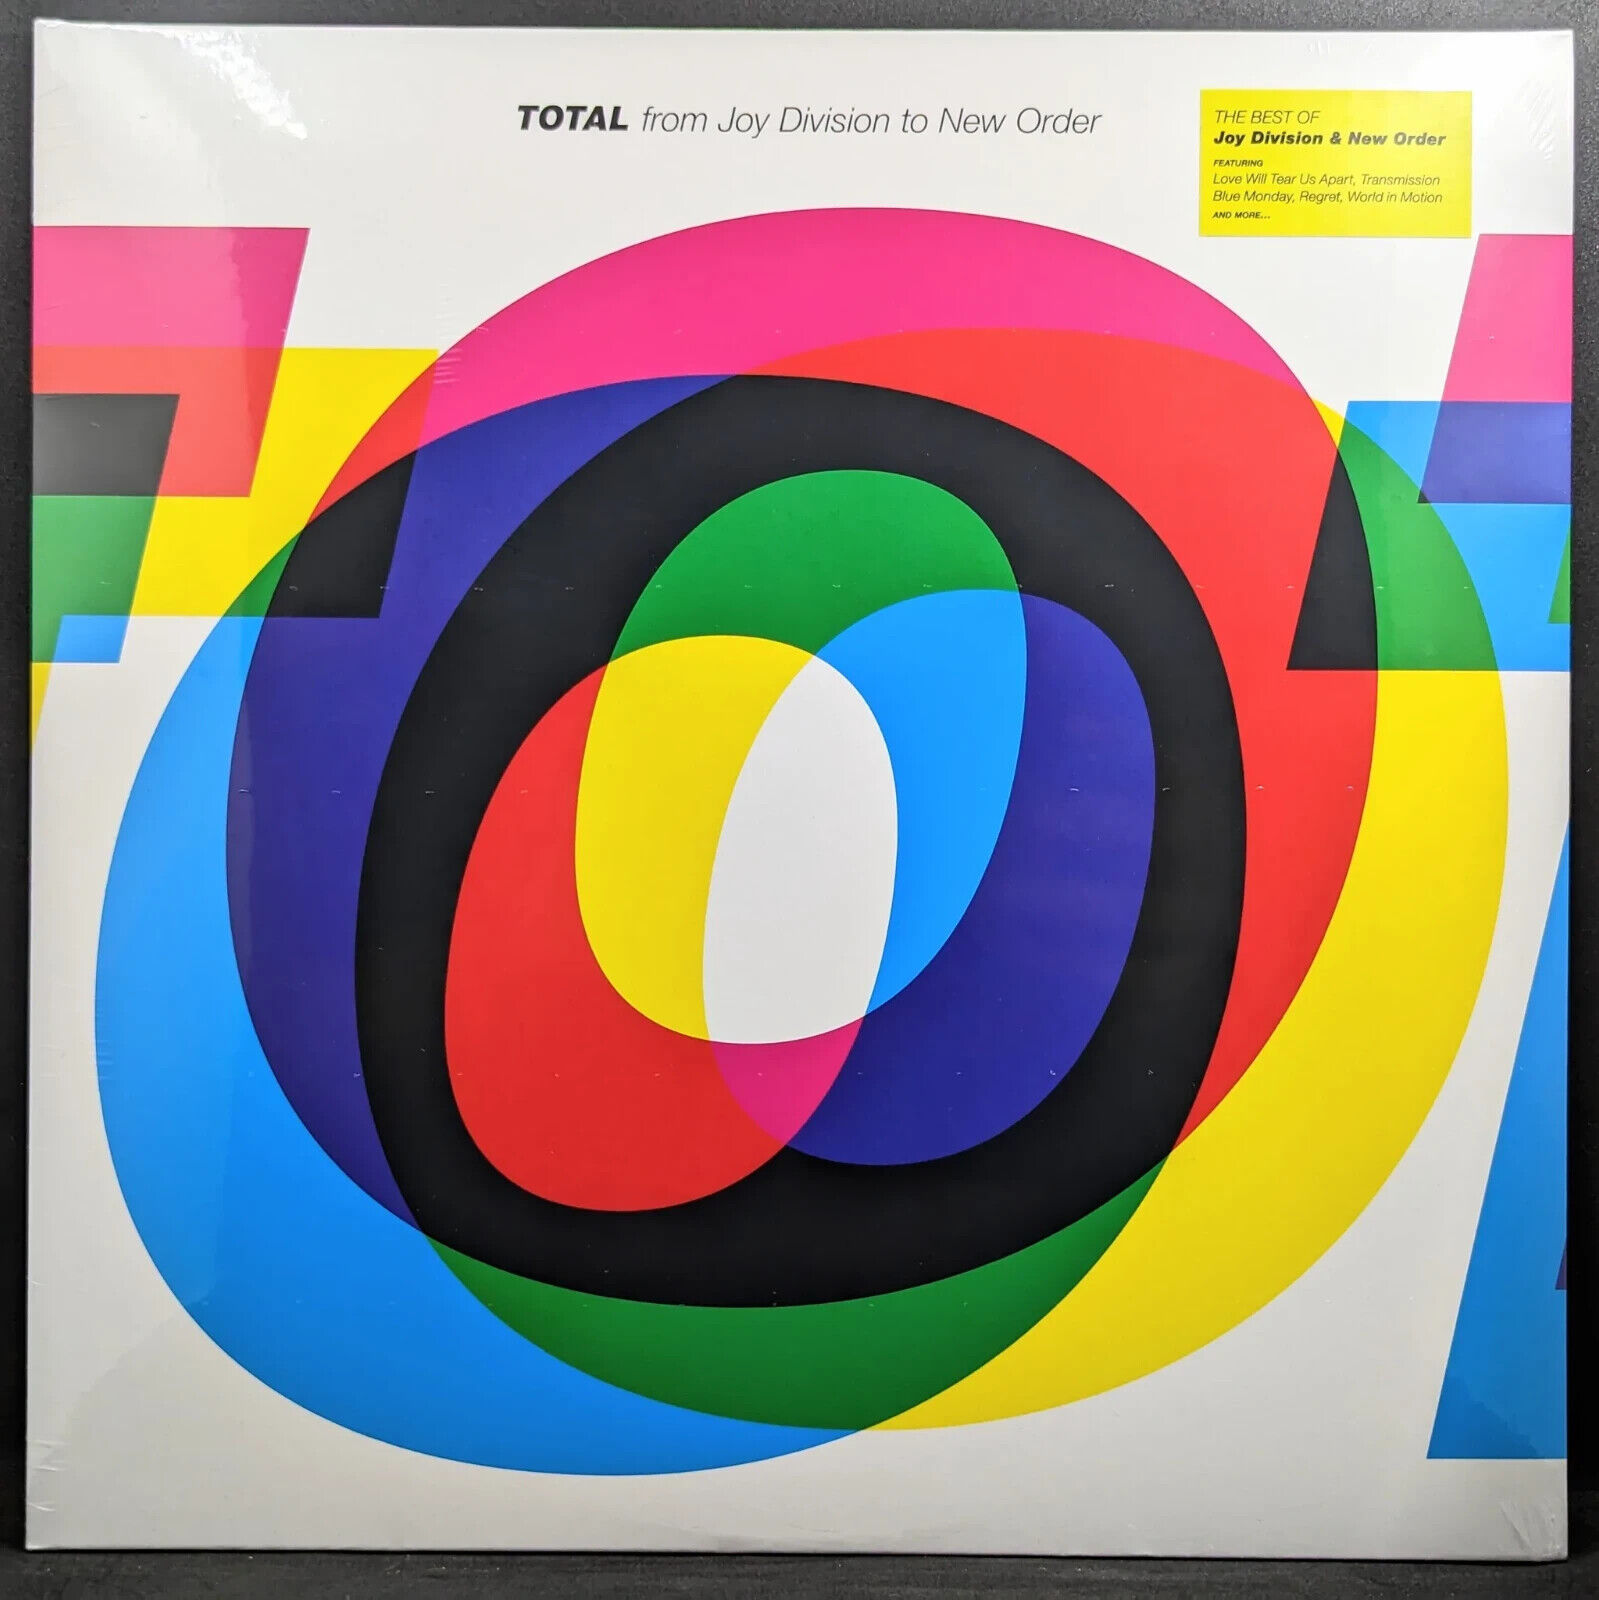 Total (BEST OF) - New Order / Joy Division - Double LP **BRAND NEW / SEALED**